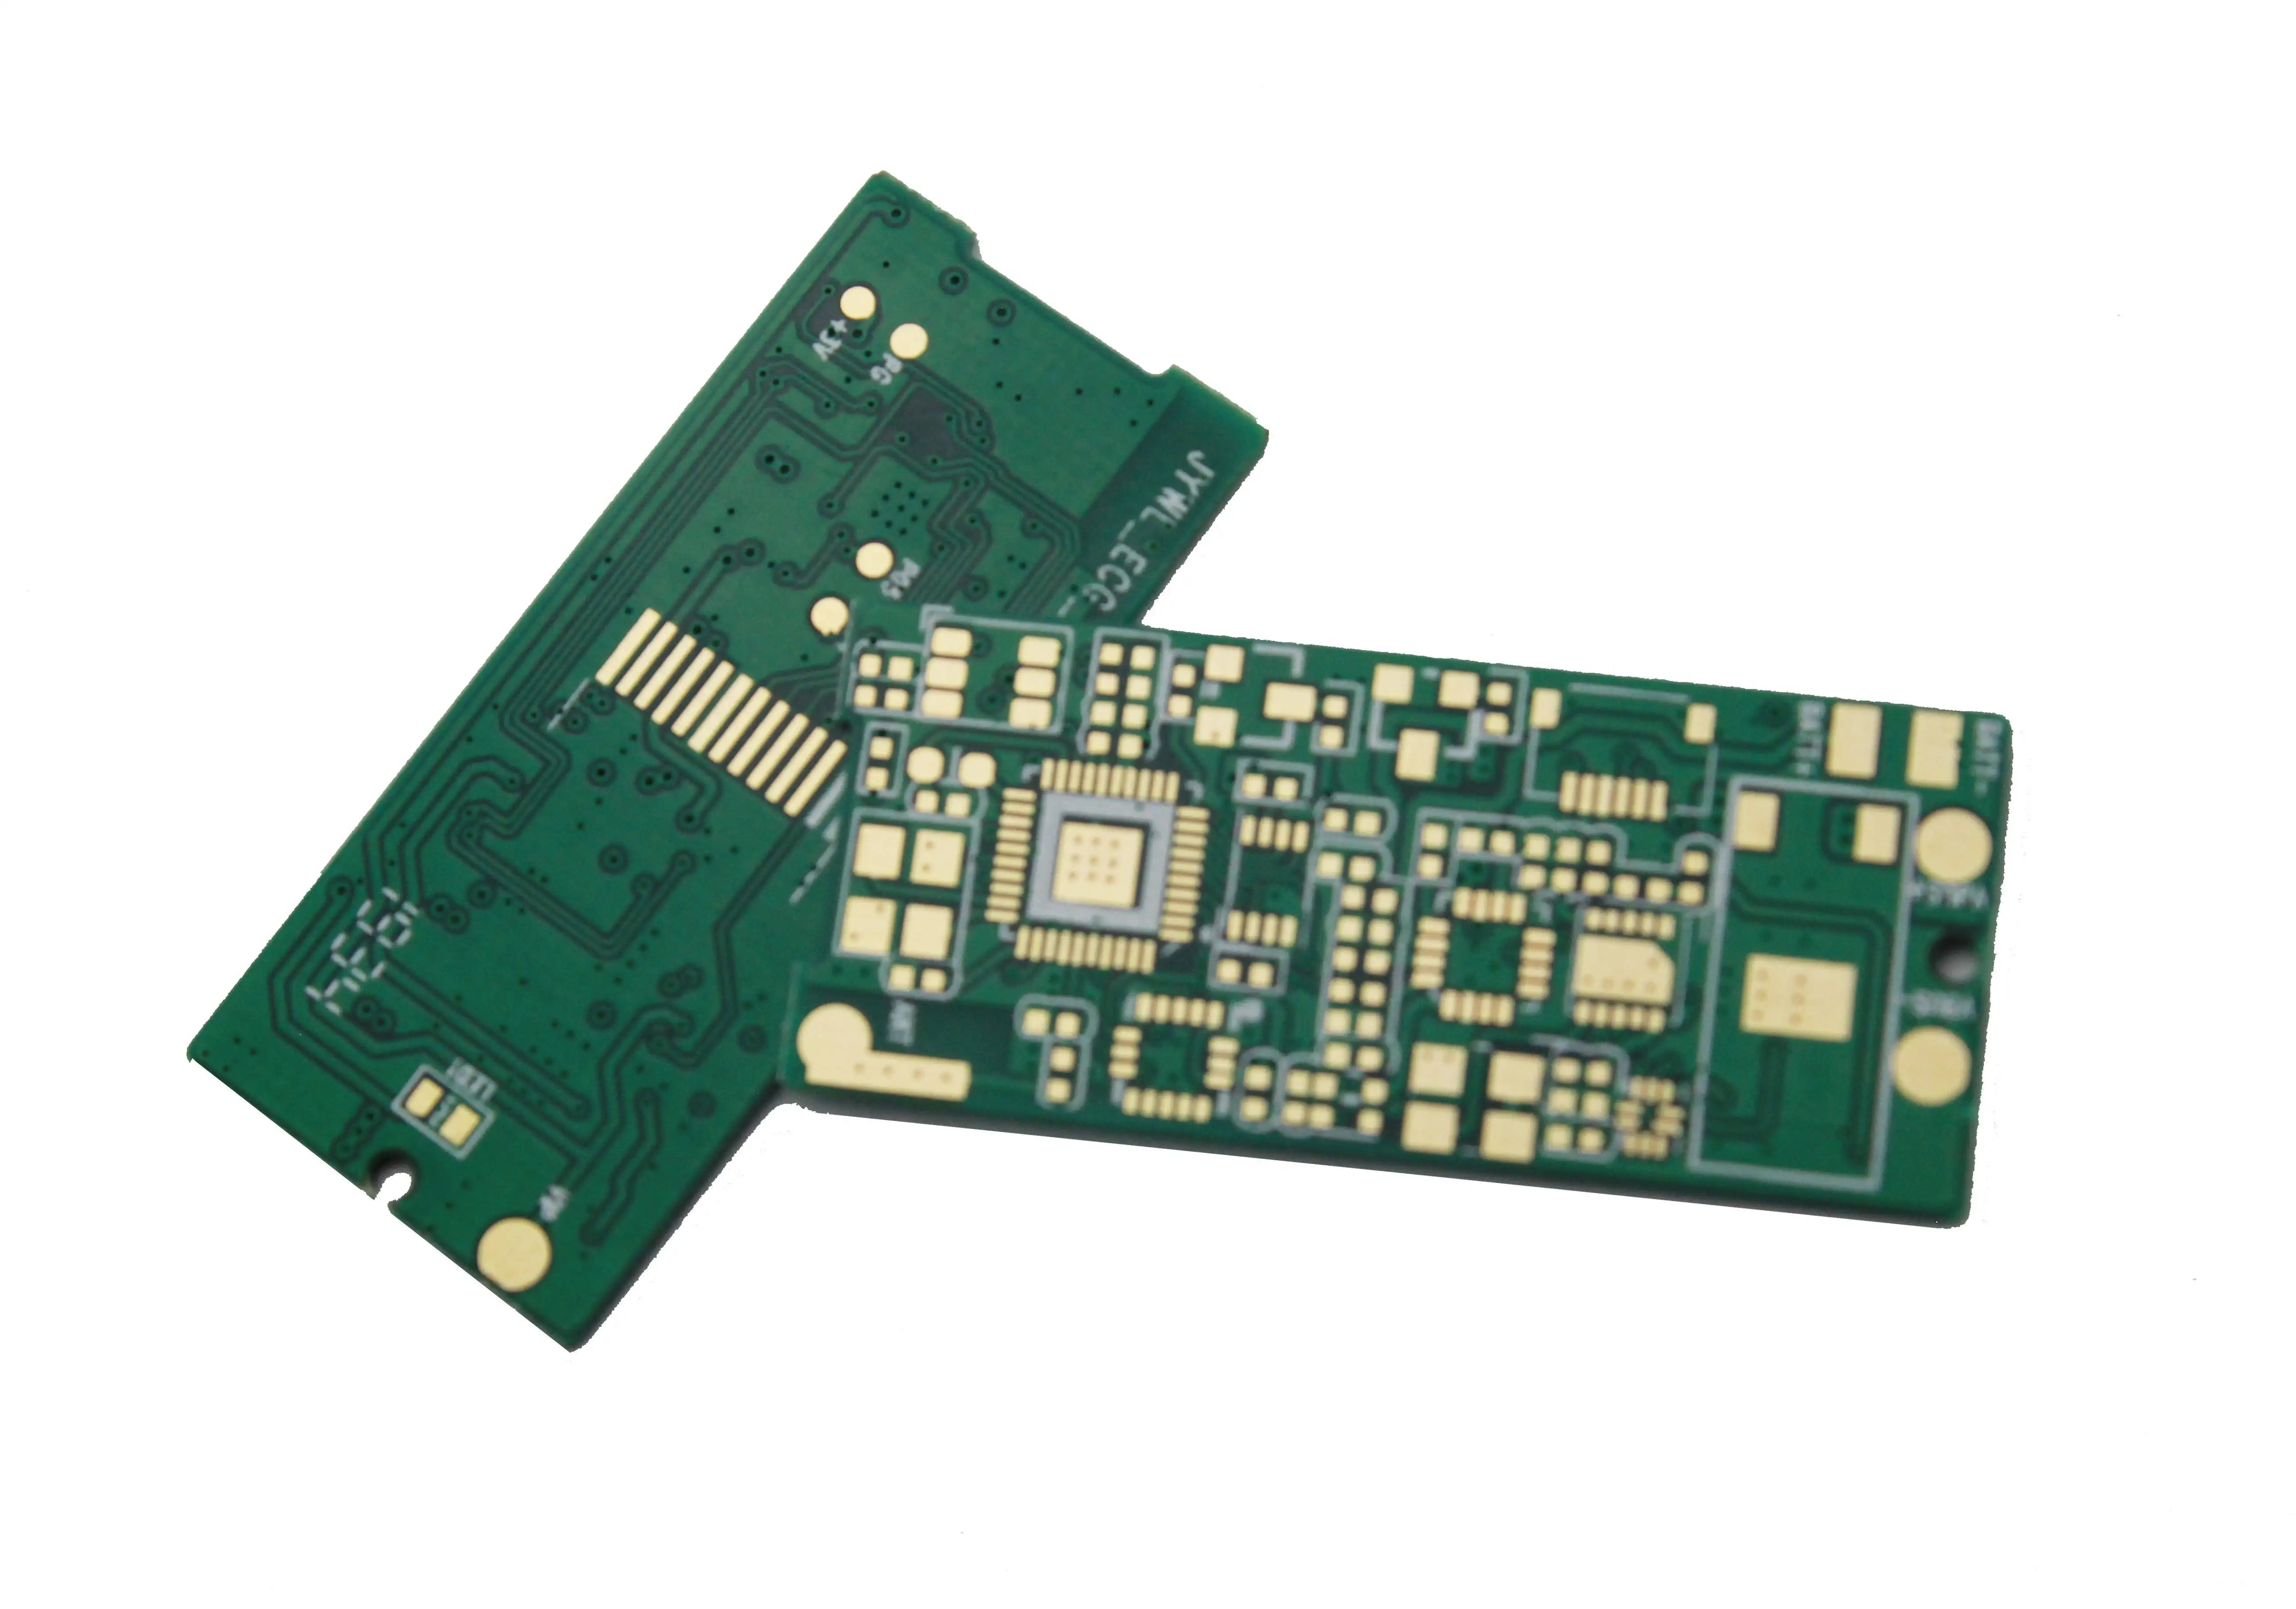 You must master the small knowledge of PCB copper coating